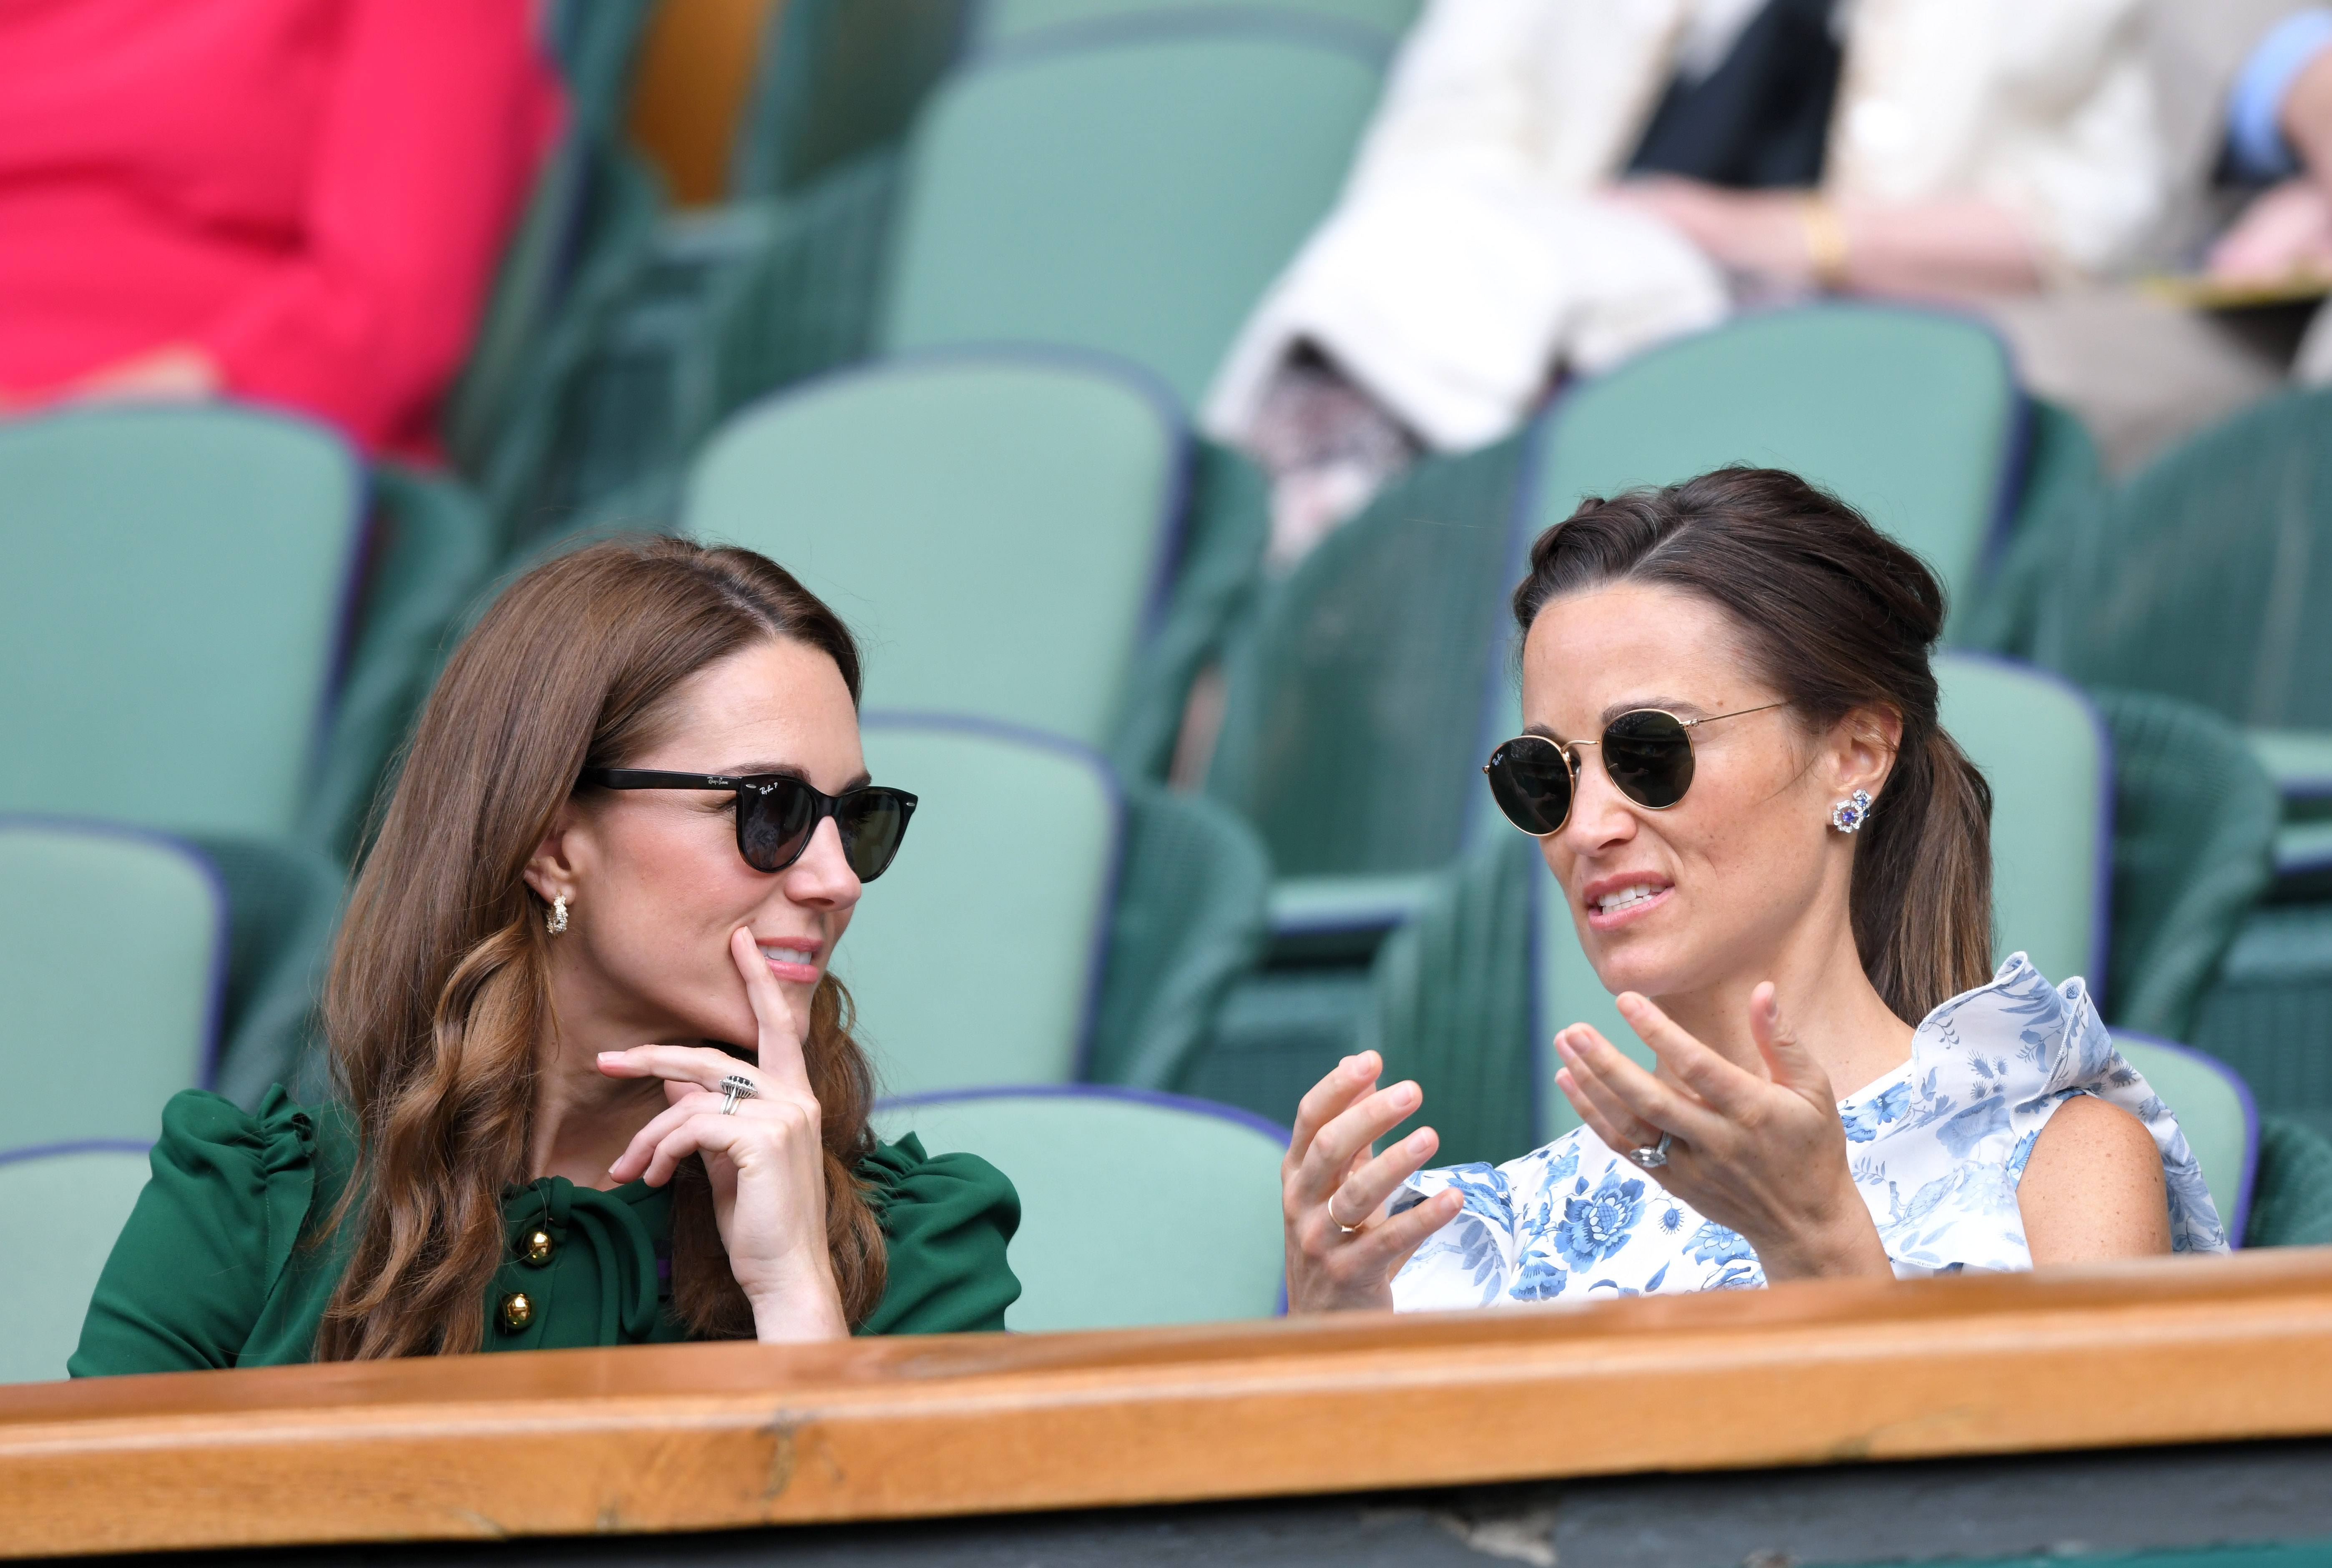 Princess Catherine and Pippa Middleton at the Wimbledon Tennis Championships in London, England on July 13, 2019 | Source: Getty Images